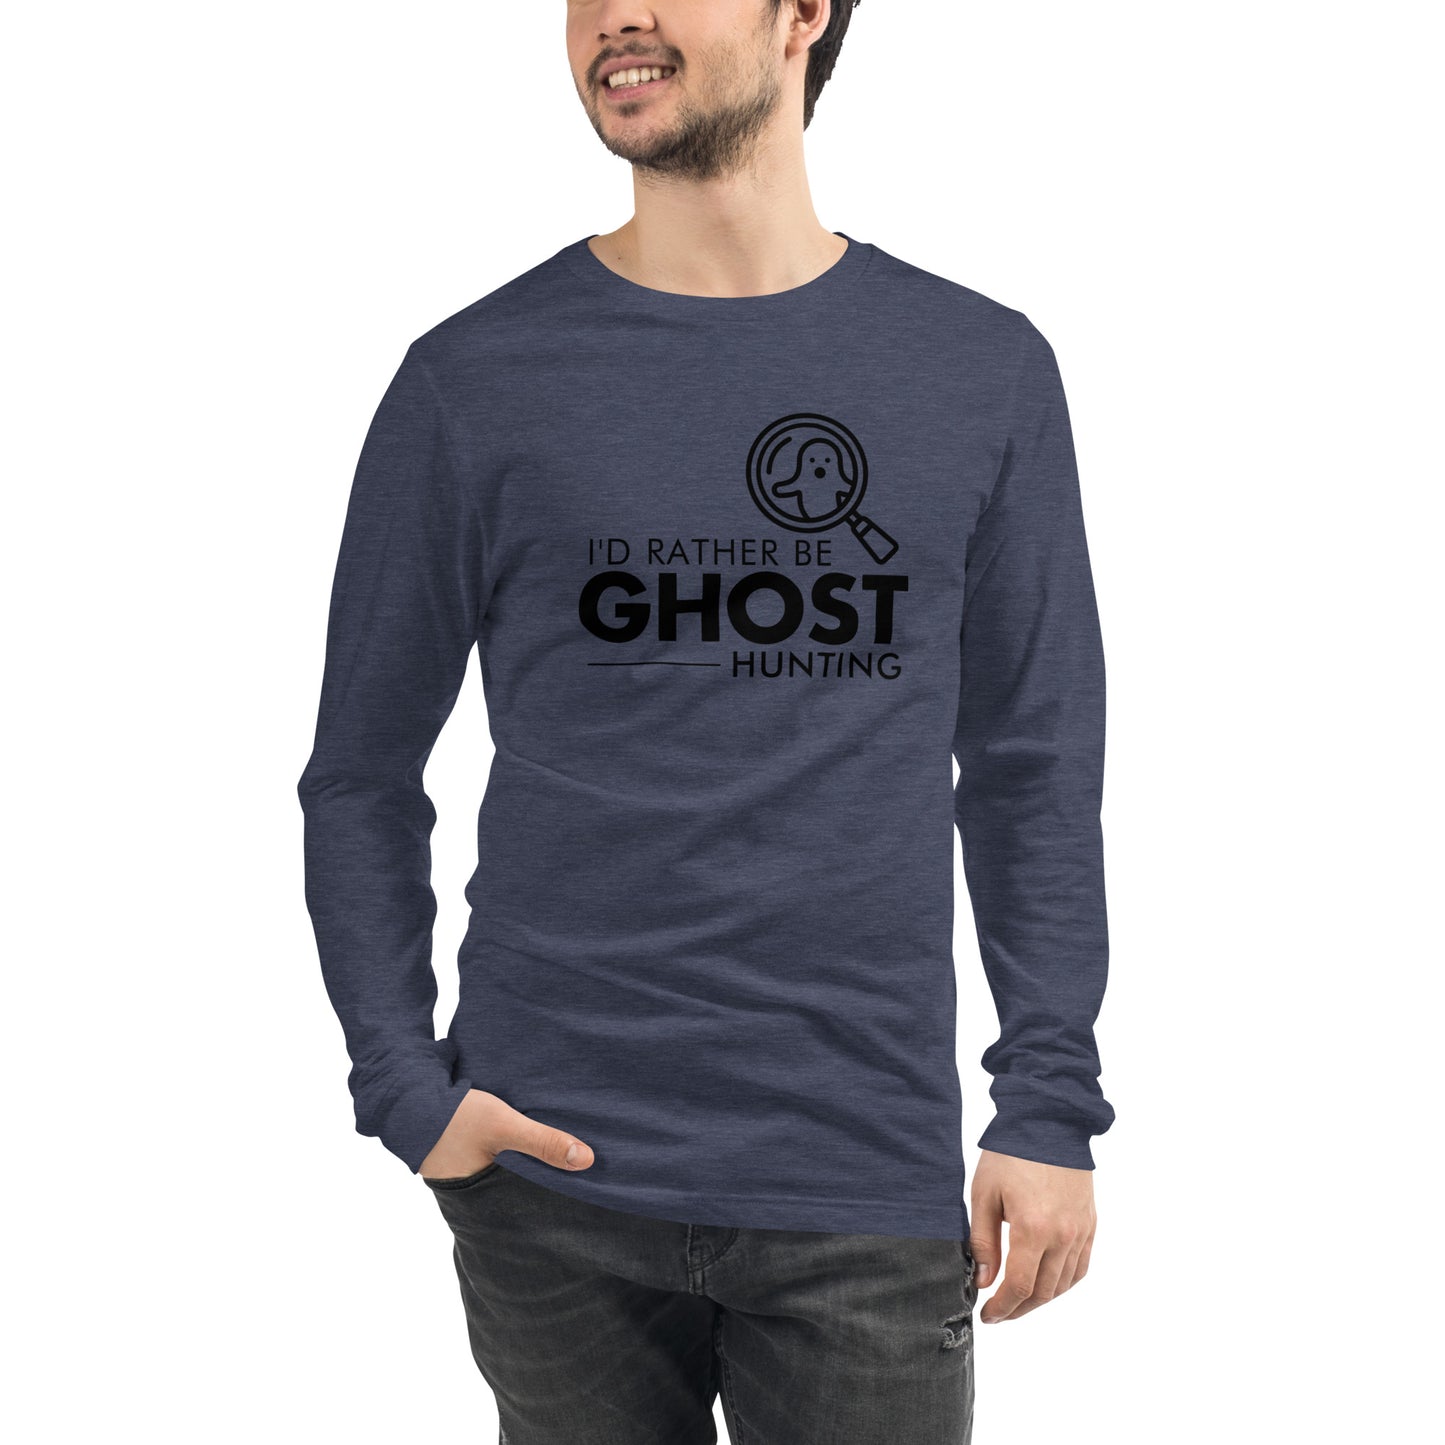 "I'd Rather Be Ghost Hunting" / Unisex Long Sleeve Tee